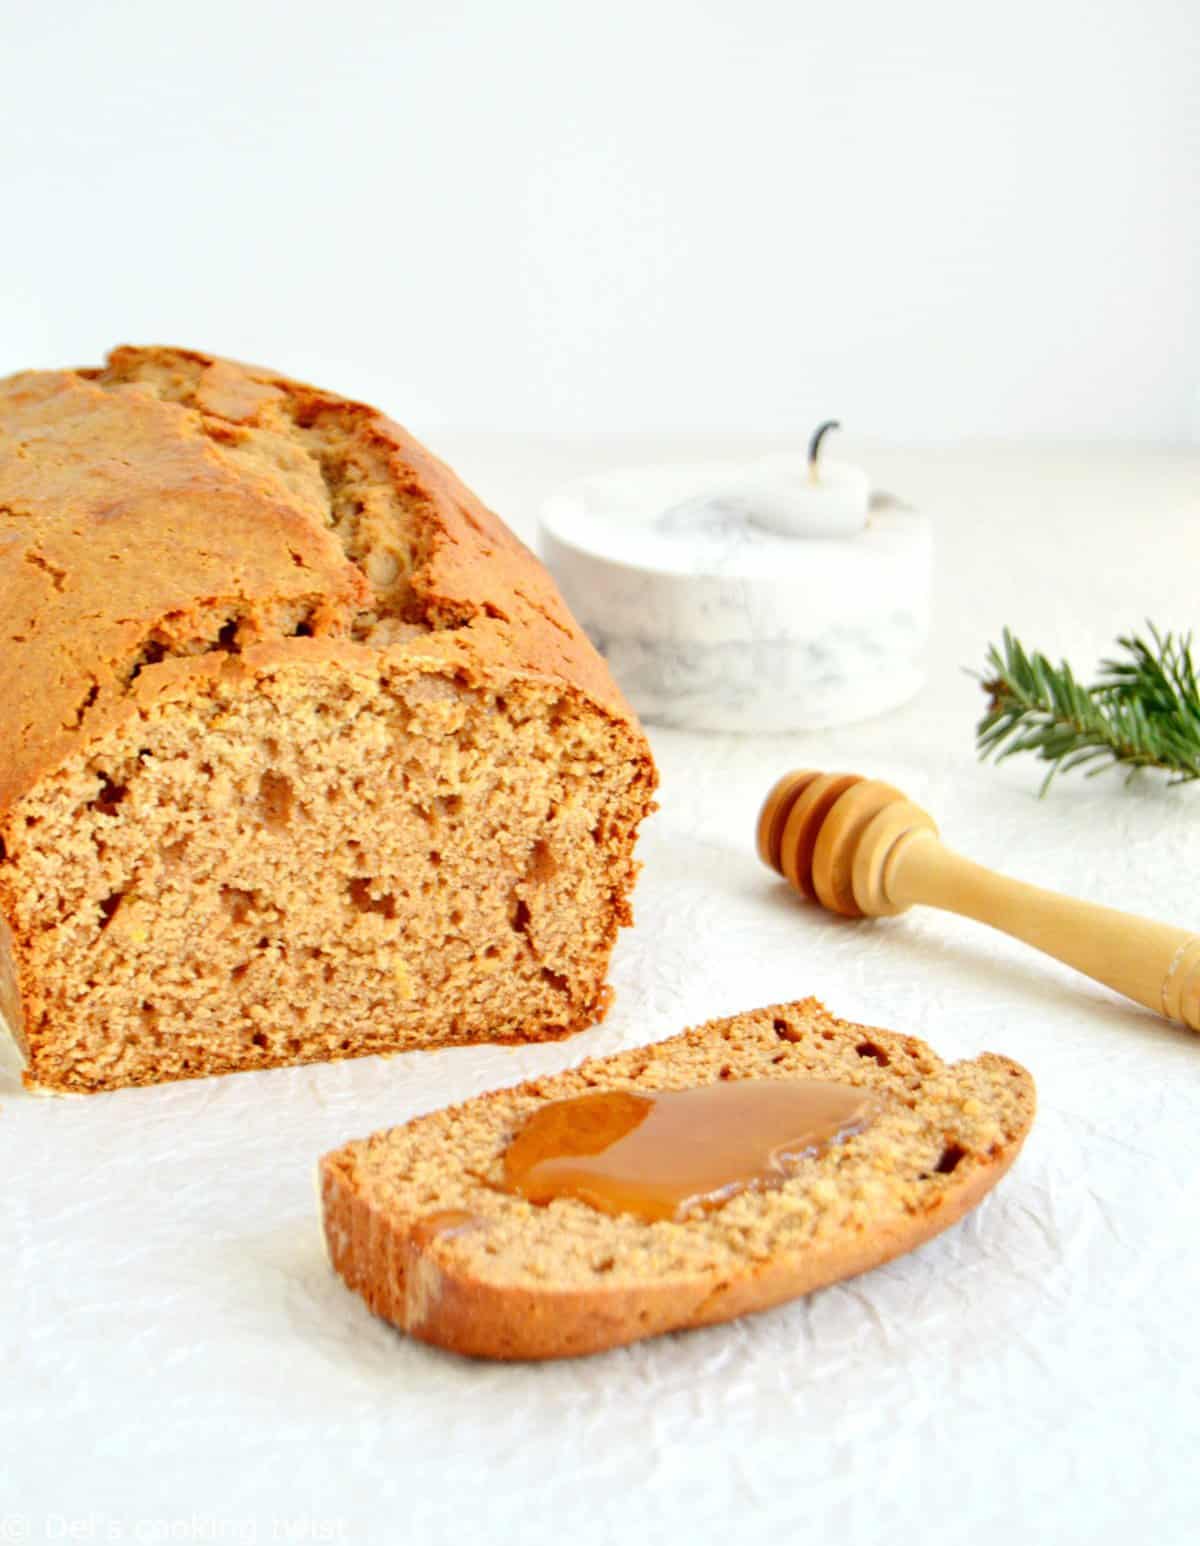 Classic French Spiced Bread (Pain d'Épices) - Pardon Your French